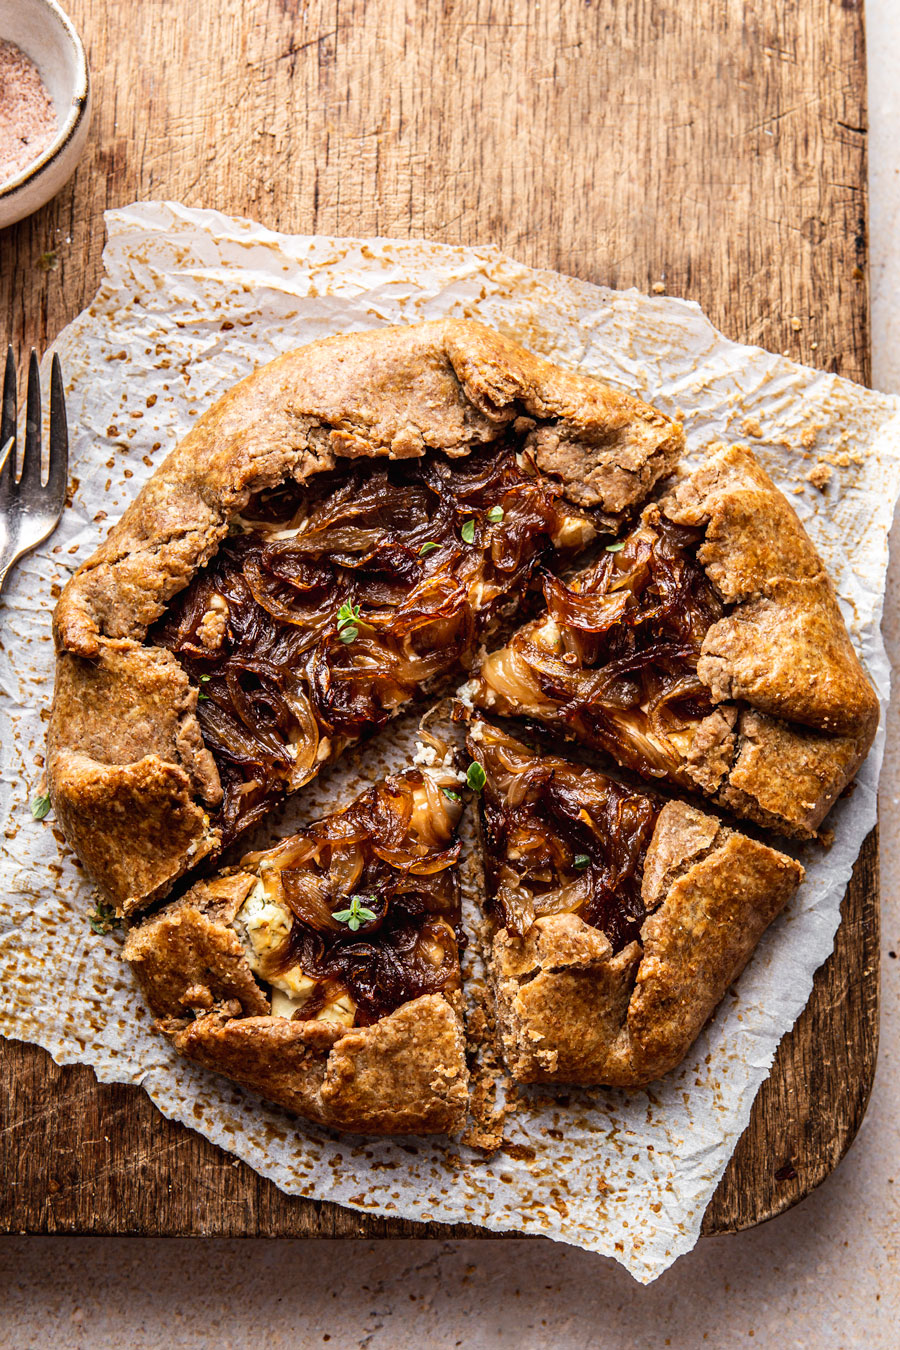 Caramelized Onion Galette with Goat Cheese natteats